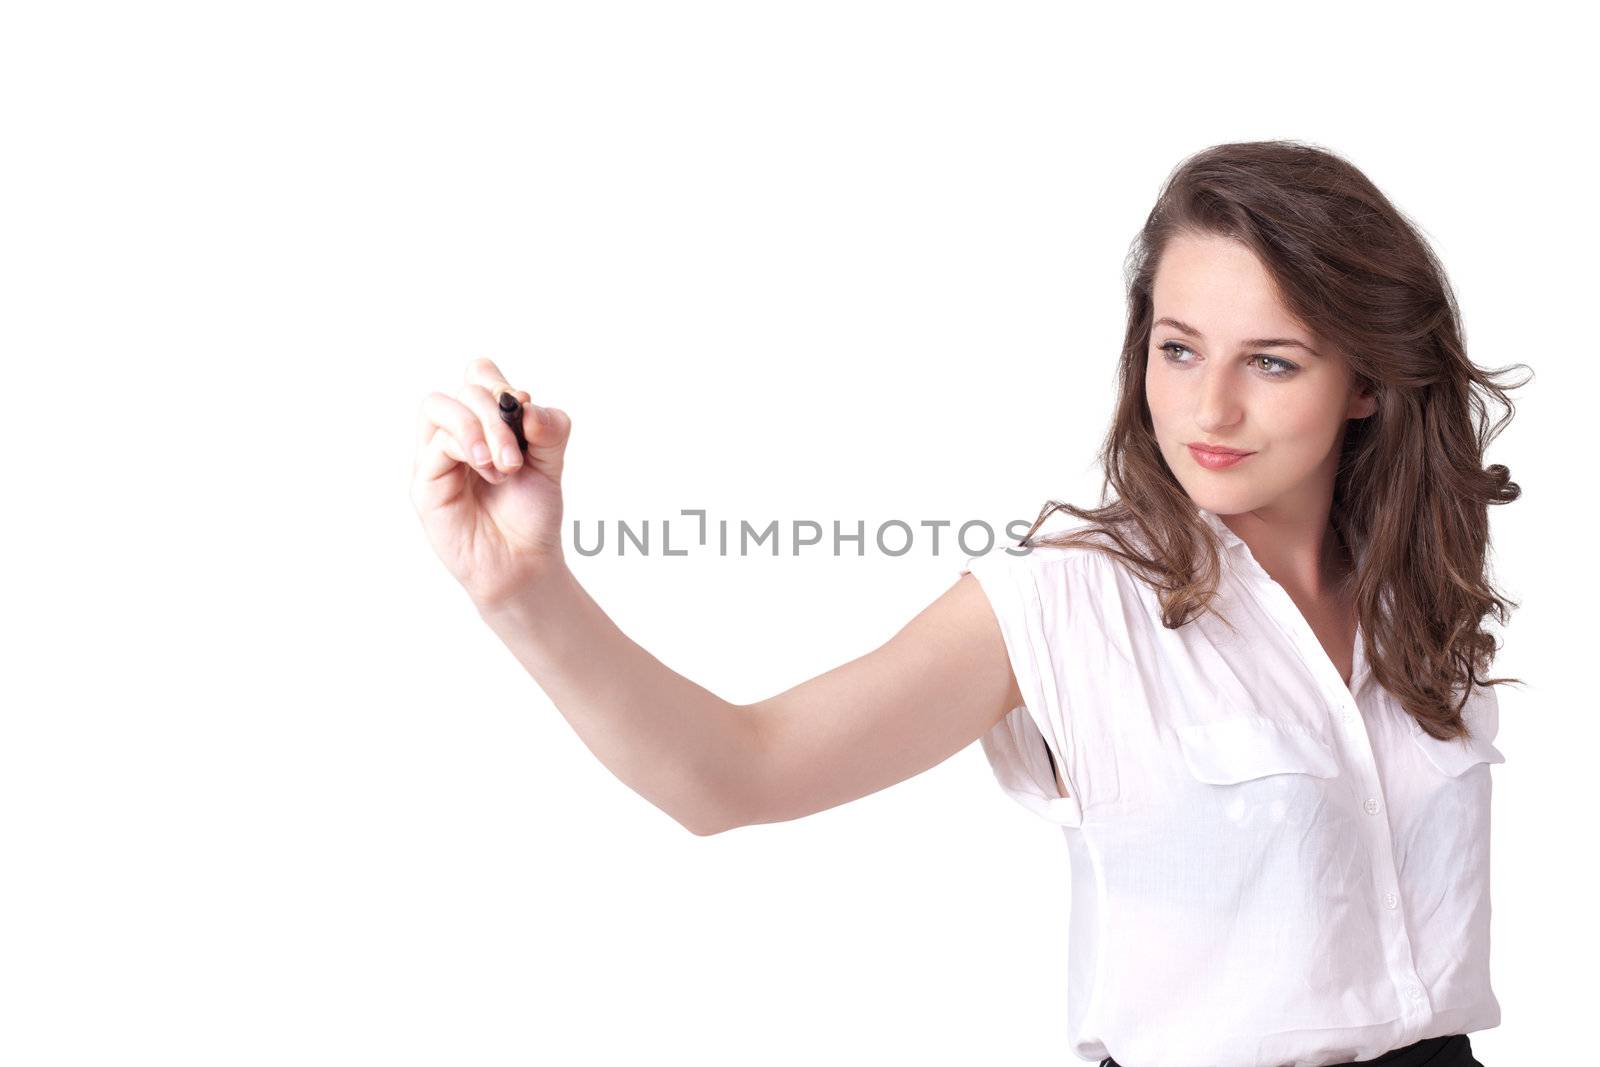 Young woman drawing on wihteboard with white copyspace